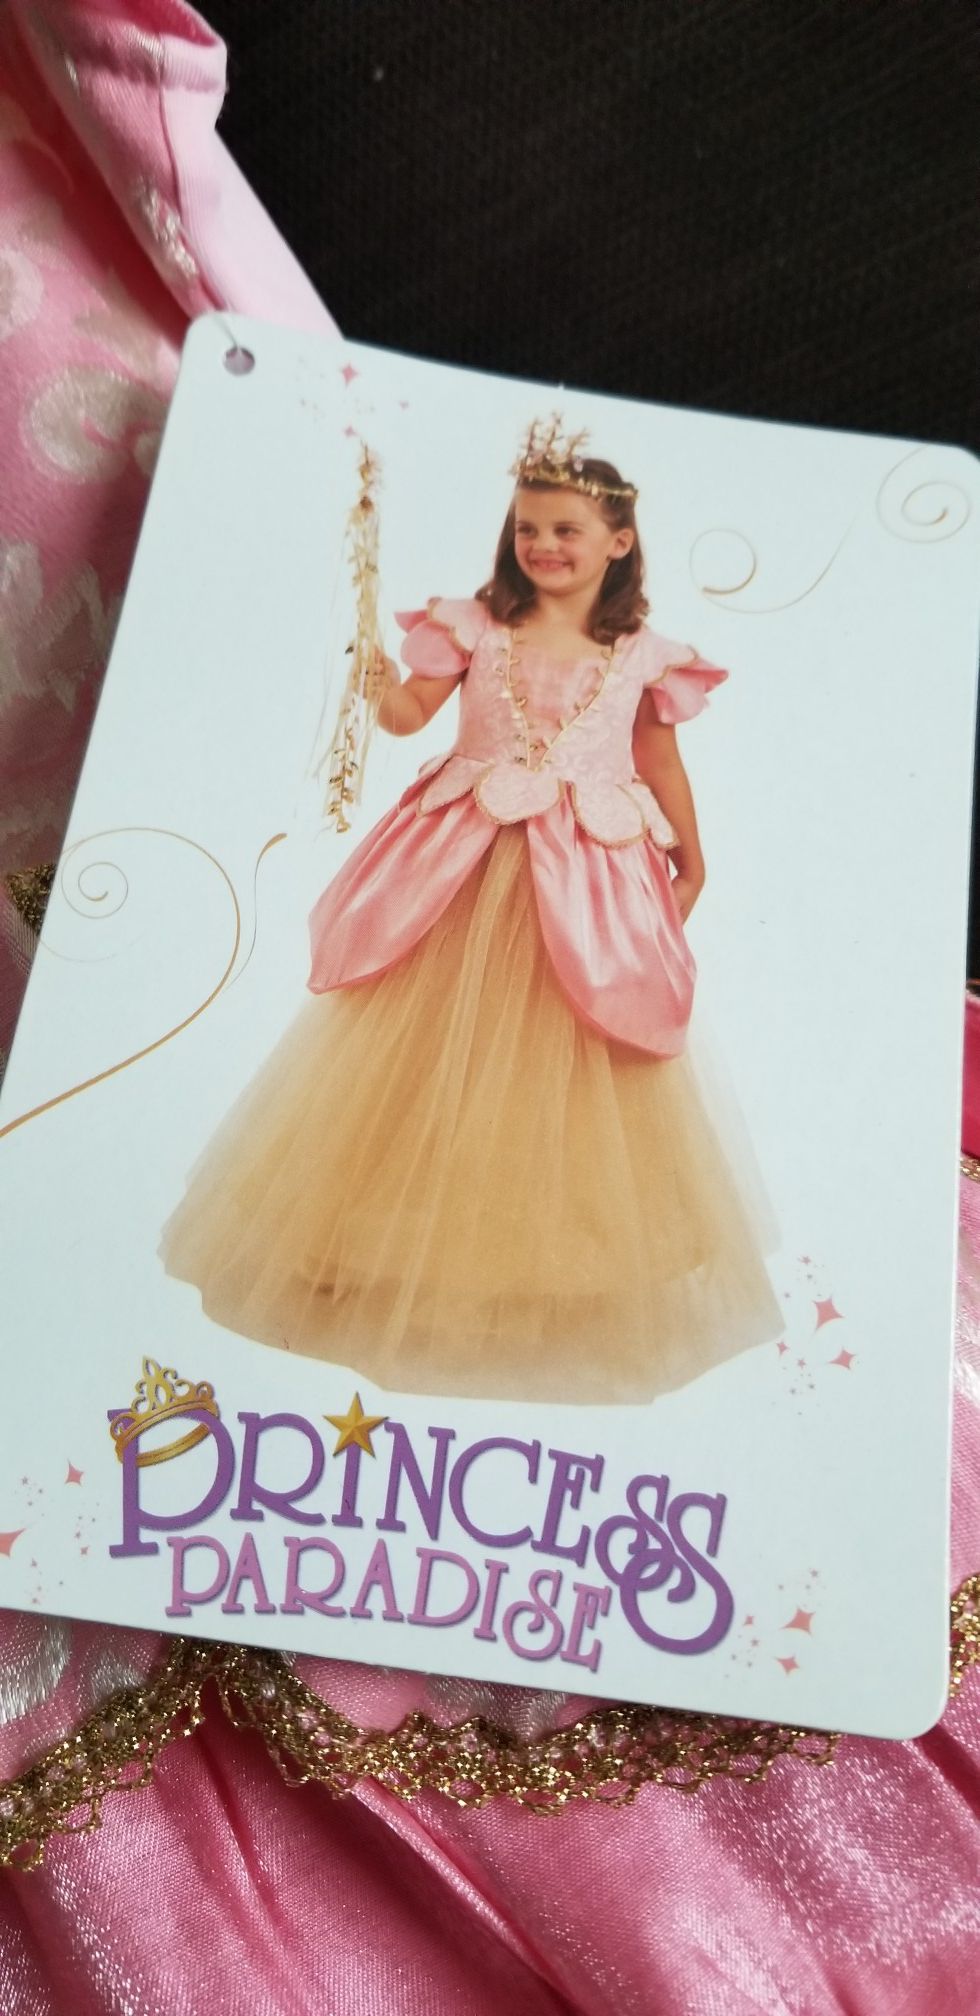 Children's size 10 Brand New in package, never worn Pocket Princess costume; Premium / Deluxe